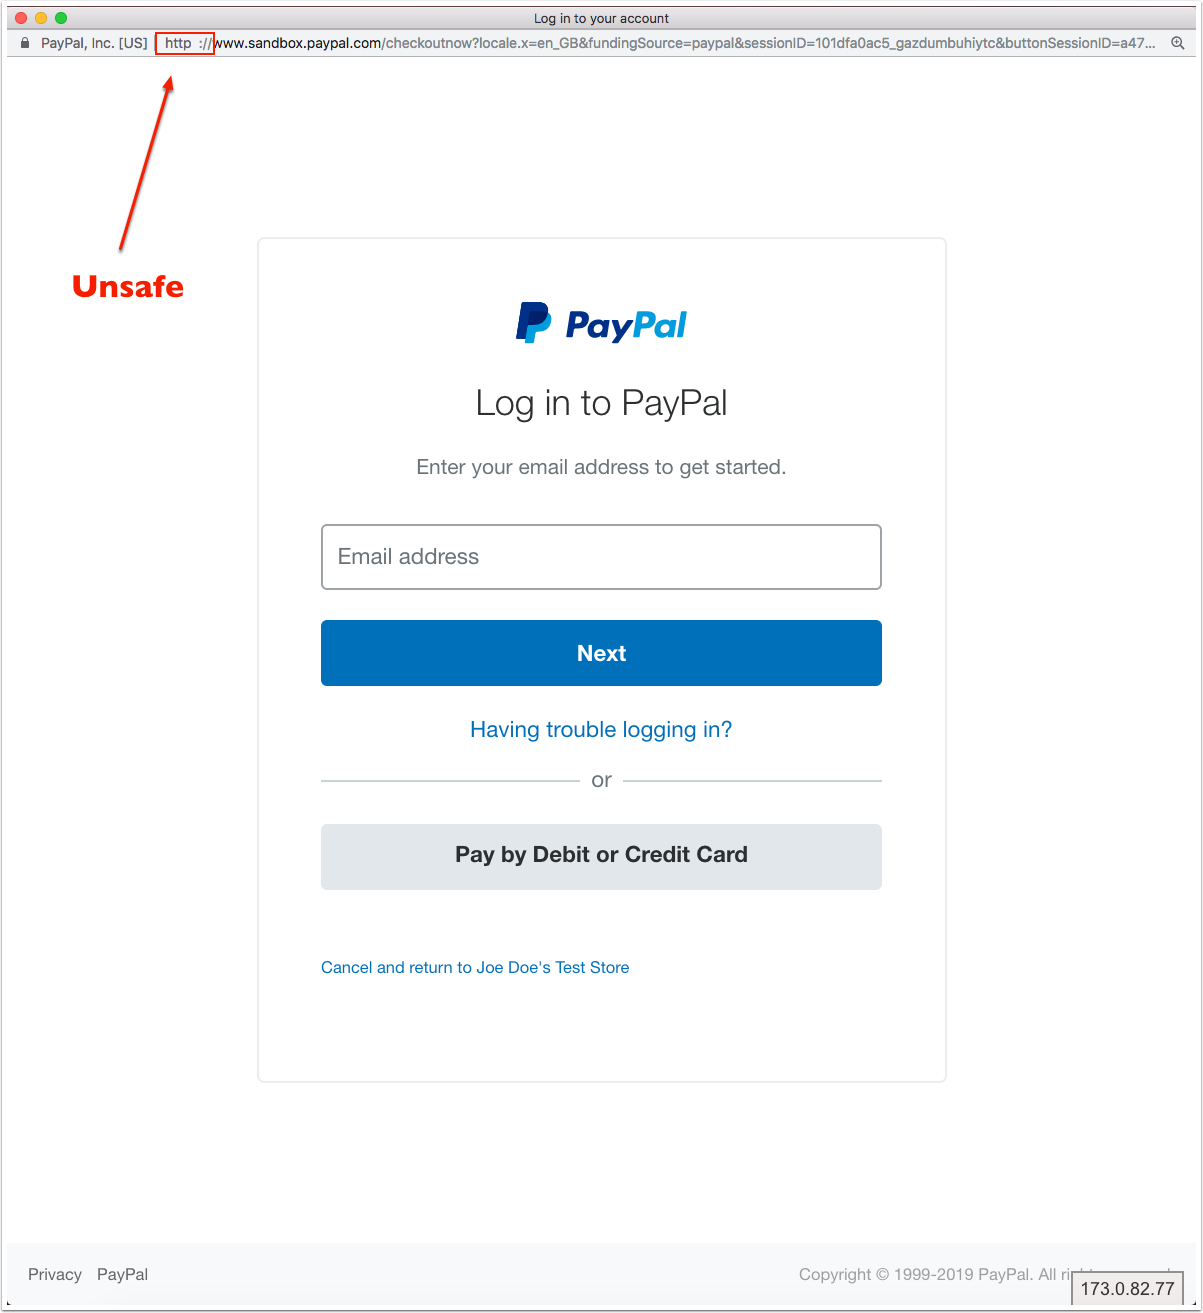 An image showing a PayPal login screen. An red arrow with the text ‘Unsafe’ points to the website address which shows an http prefix and an unusual version of the PayPal URL.